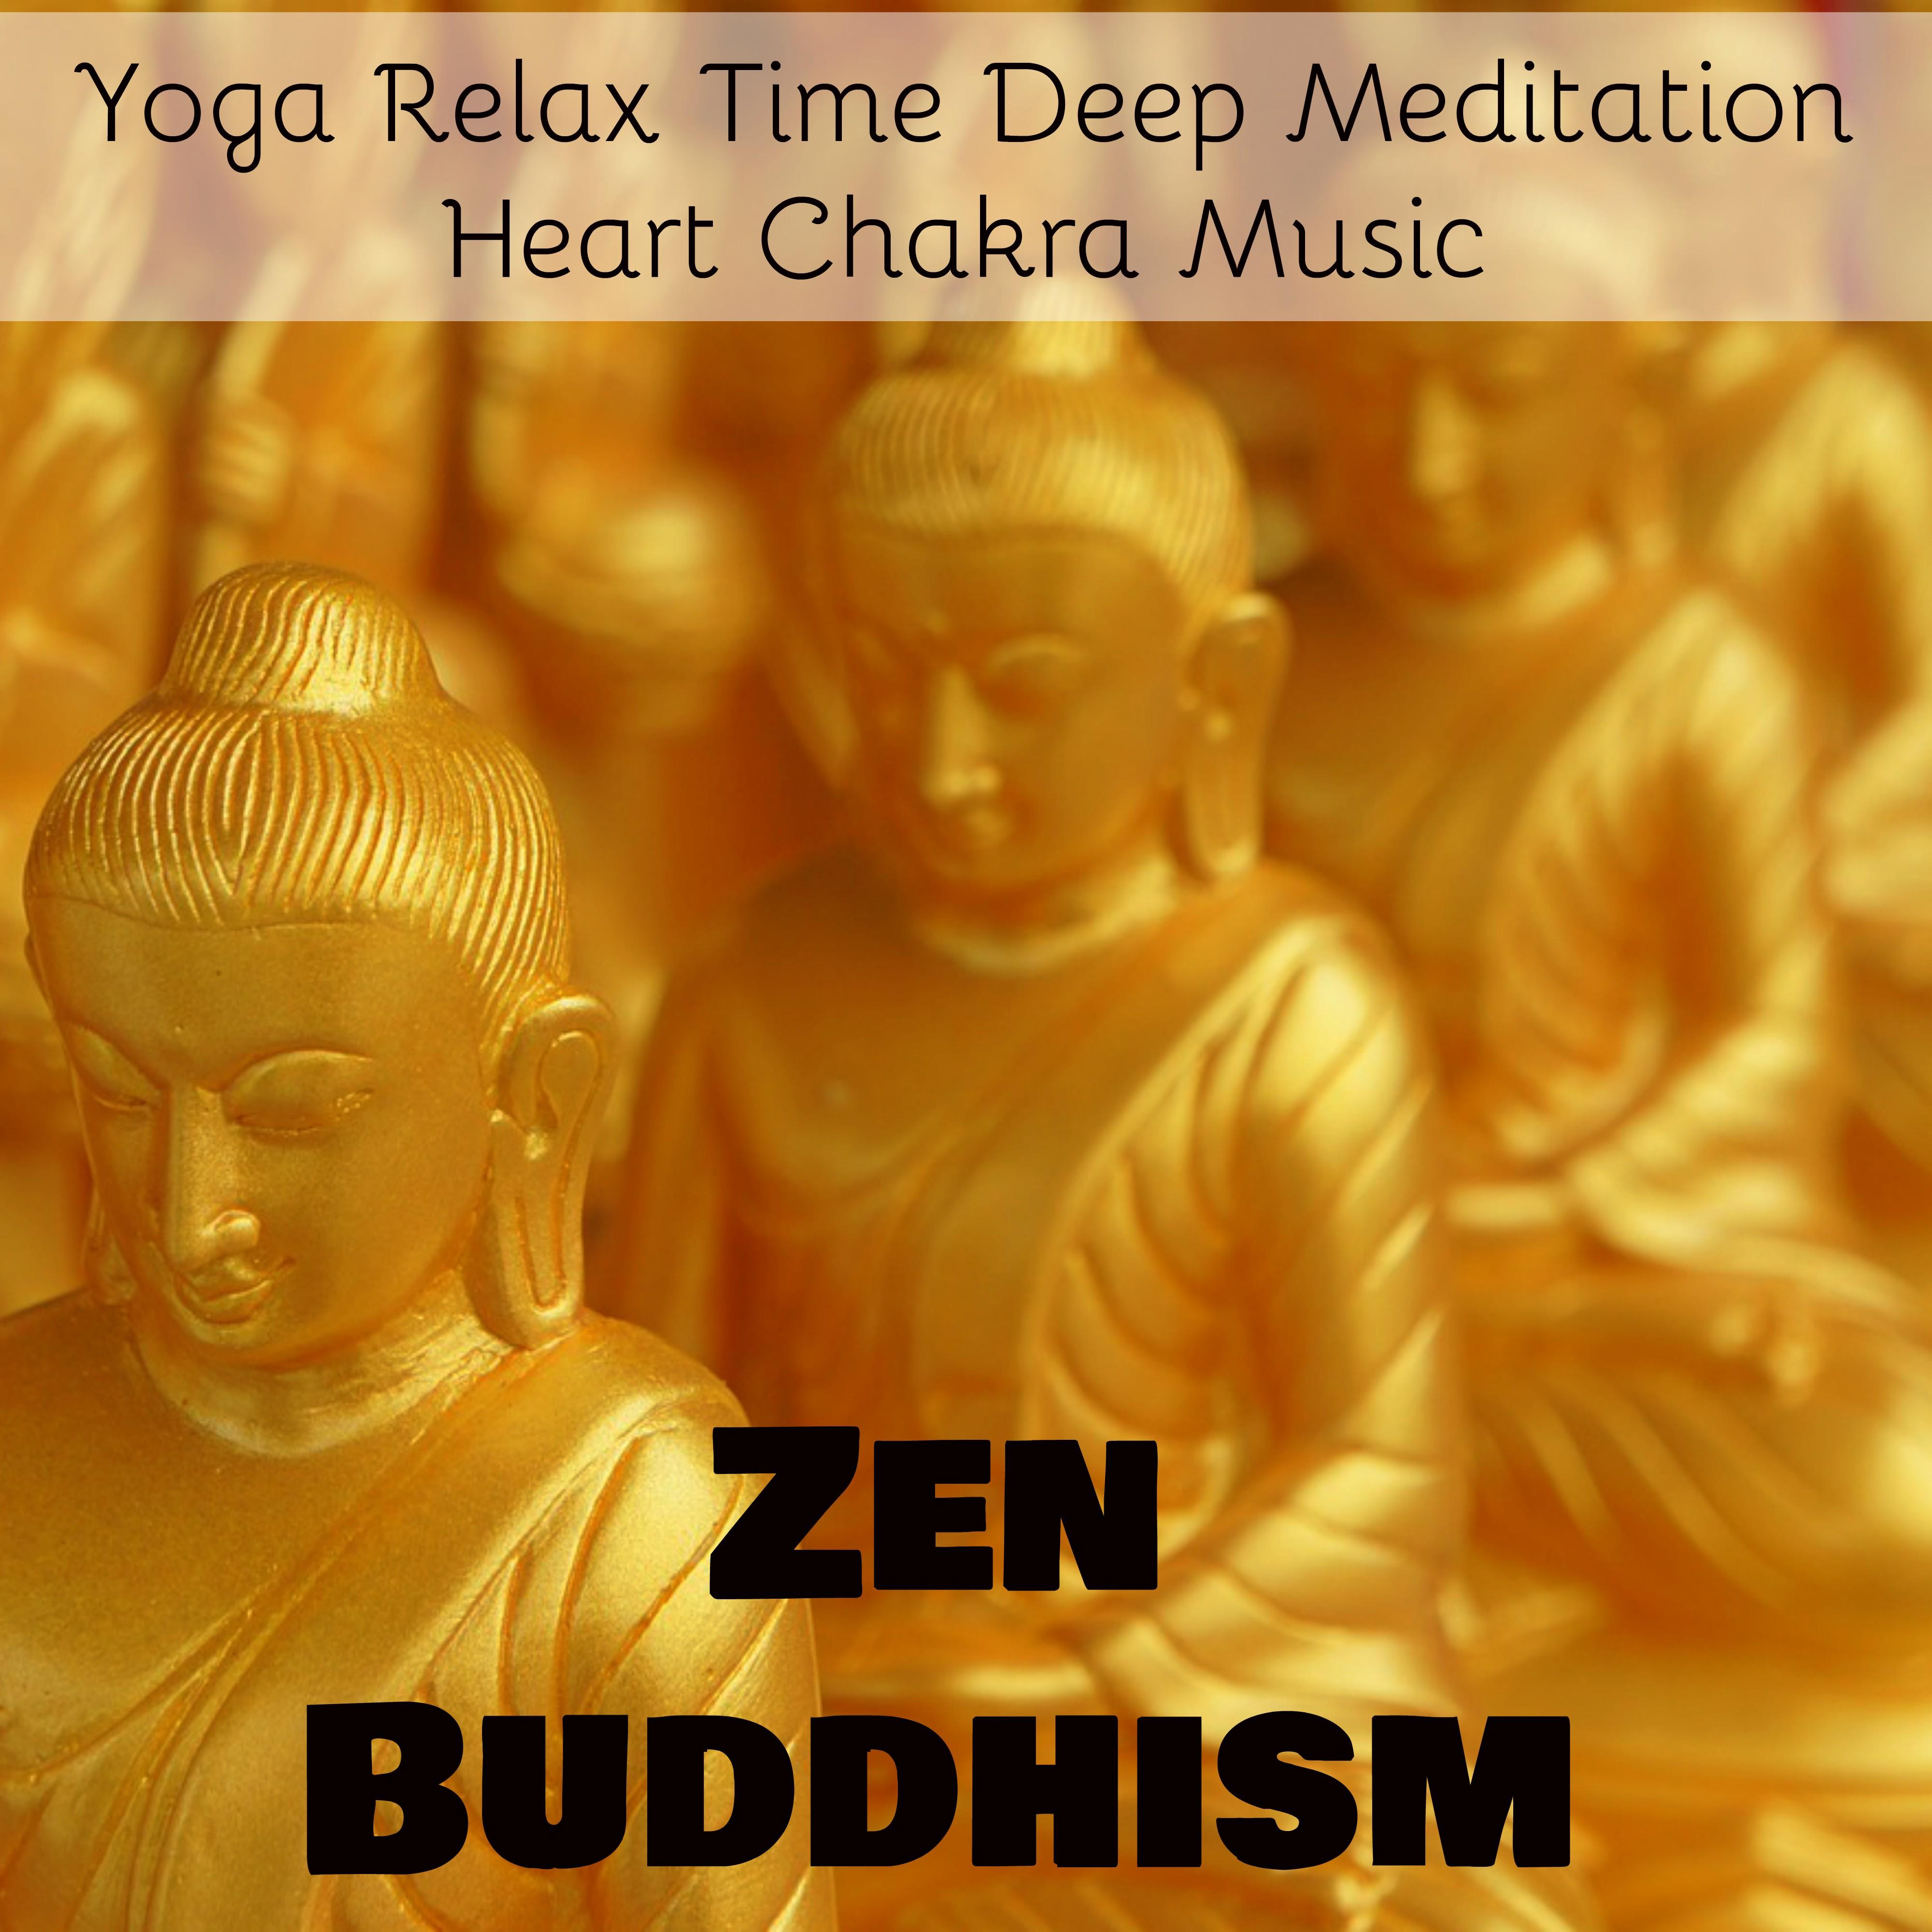 Zen Buddhism - Yoga Relax Time Deep Meditation Heart Chakra Music to Open Your Mind and Interior Health with Healing Nature Sounds